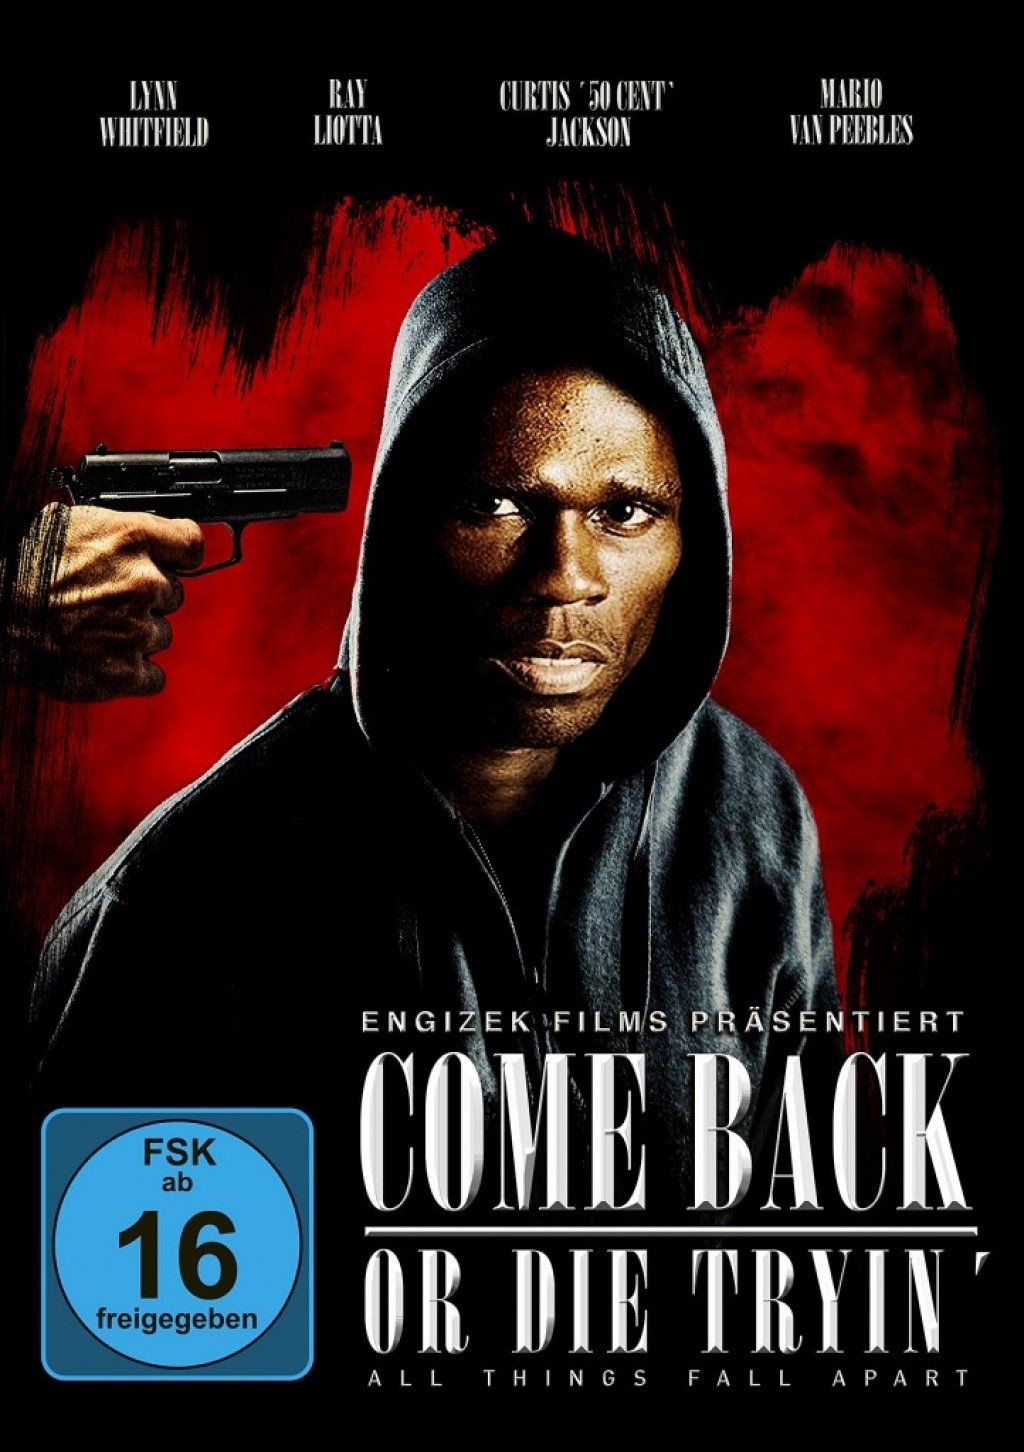 Come back or die tryin'